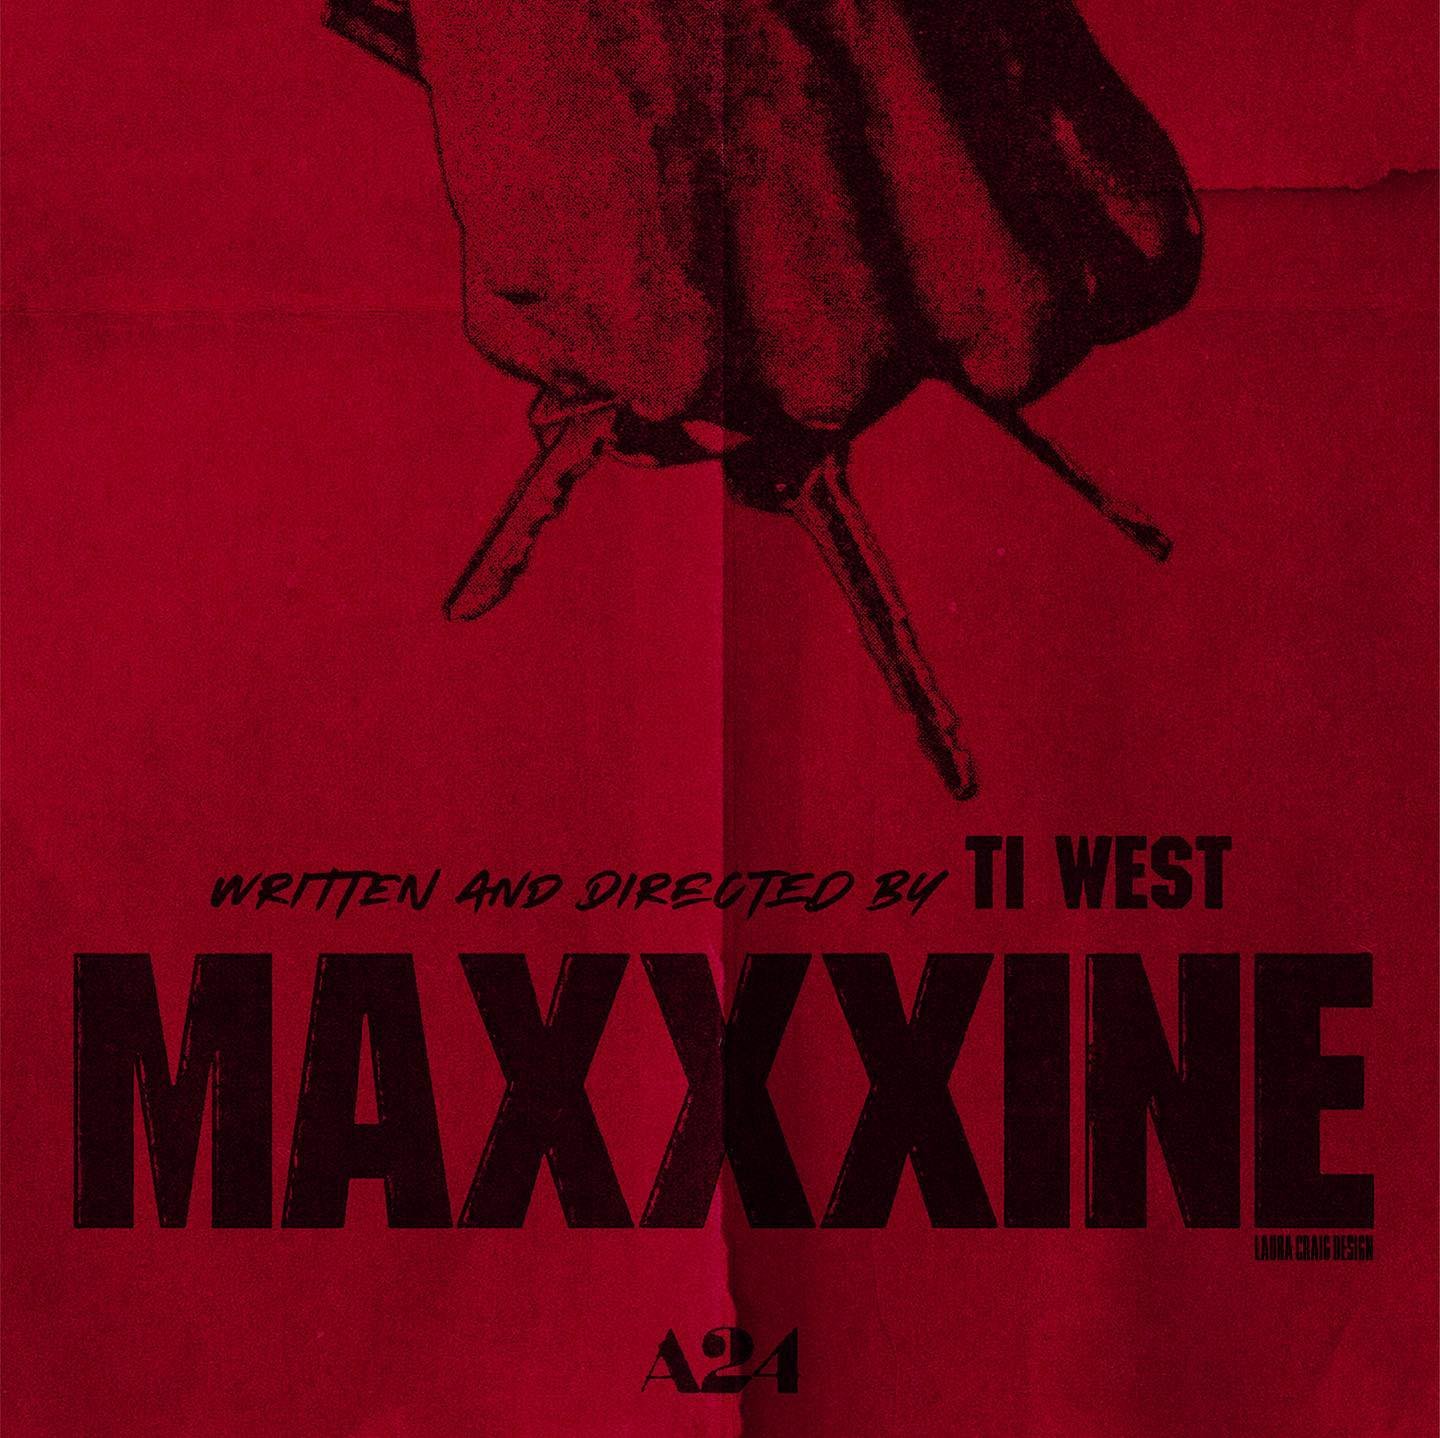 Name 5 celebrities who got their start in horror movies?

#MaXXXine #a24 #horrir #horrorposter #horrormovies #tiwest #pearl